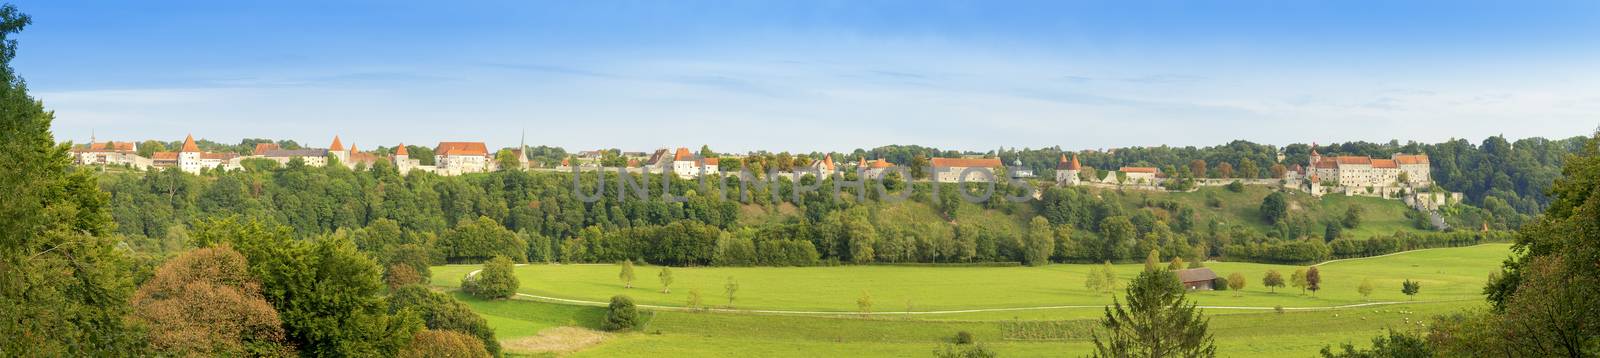 An image of a the Castle Burghausen